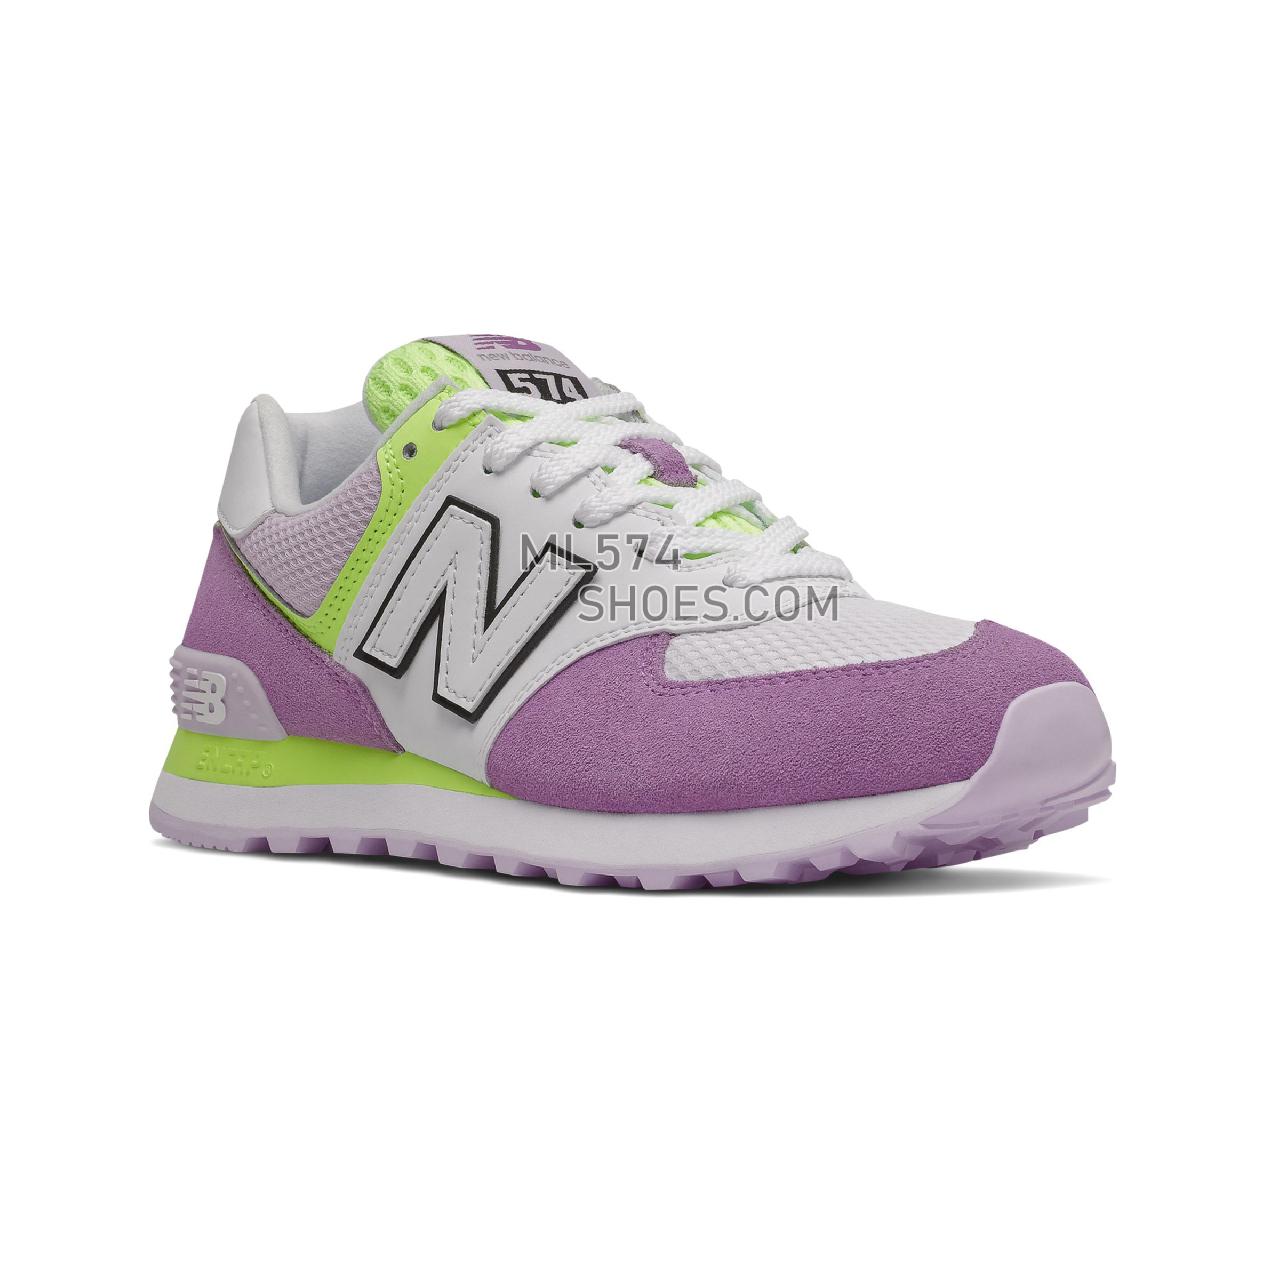 New Balance 574 - Women's Classic Sneakers - Heliotrope with Bleached Lime Glo - WL574GY2